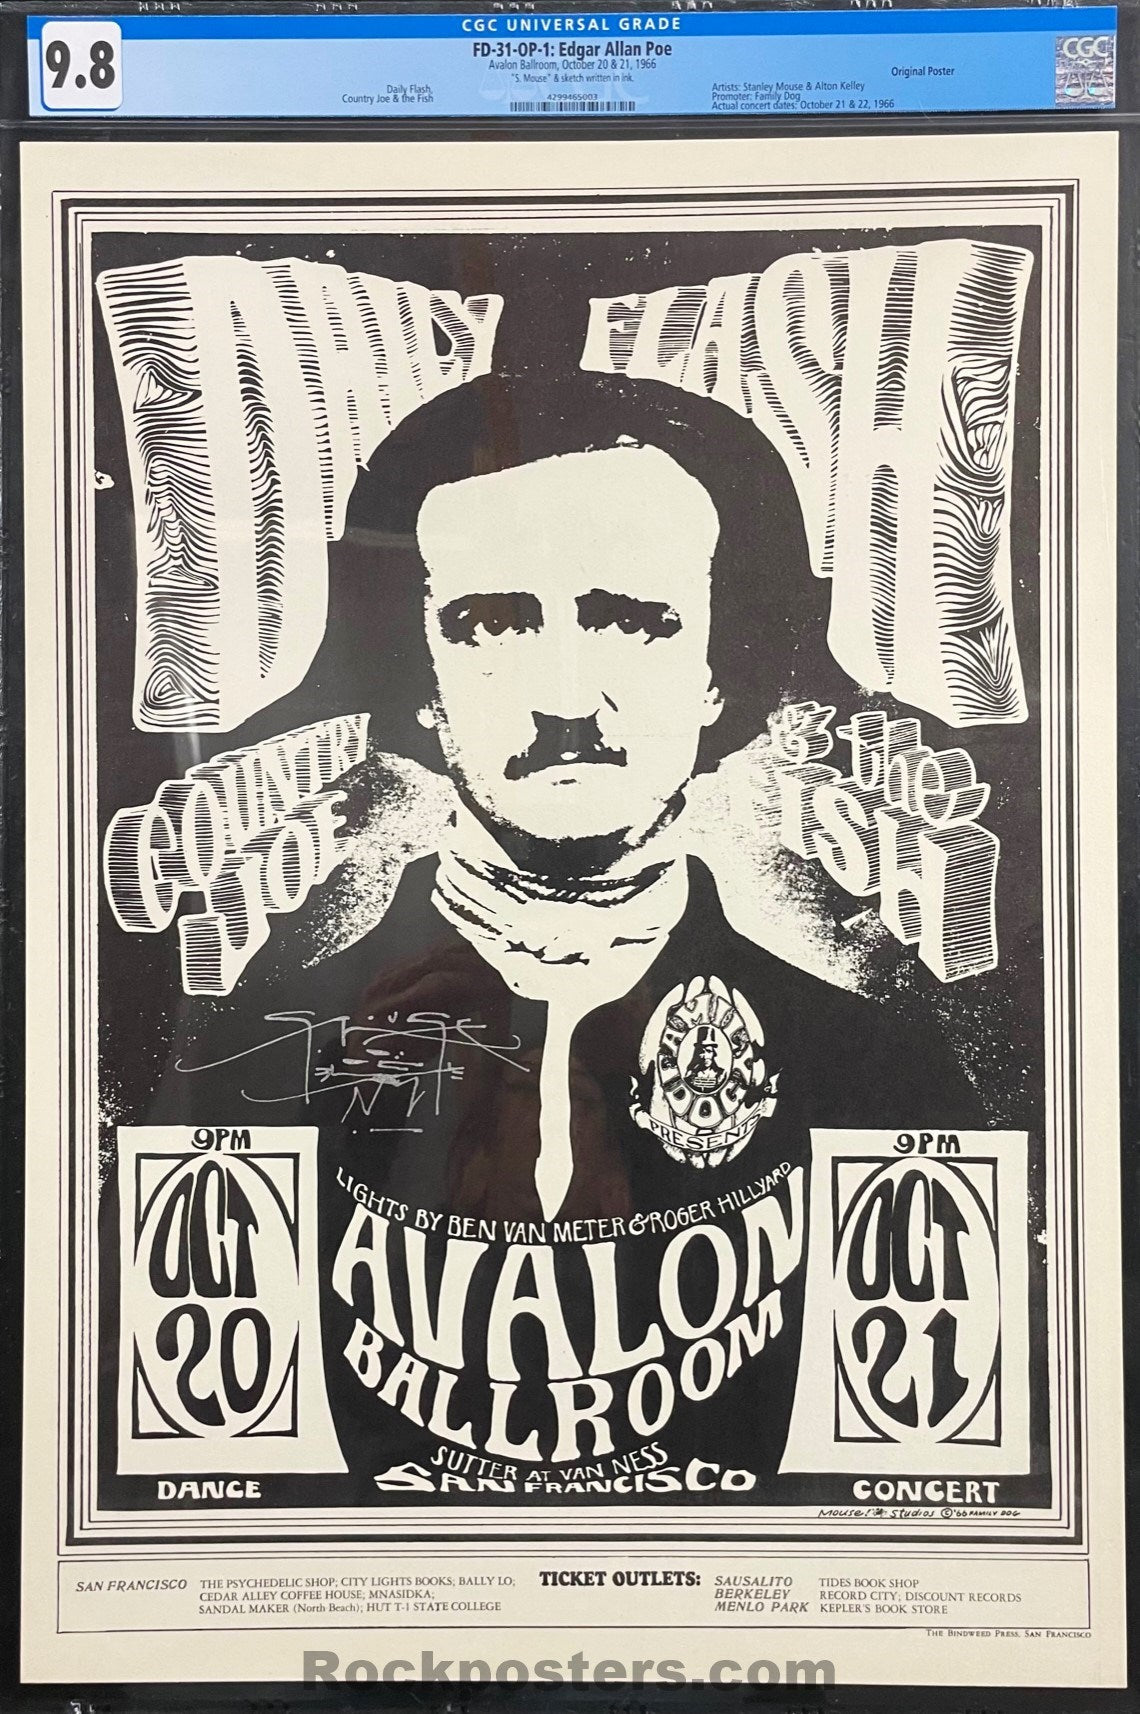 AUCTION - FD-31 - Daily Flash - Stanley Mouse Signed - 1966 Poster - Avalon Ballroom - CGC Graded 9.8